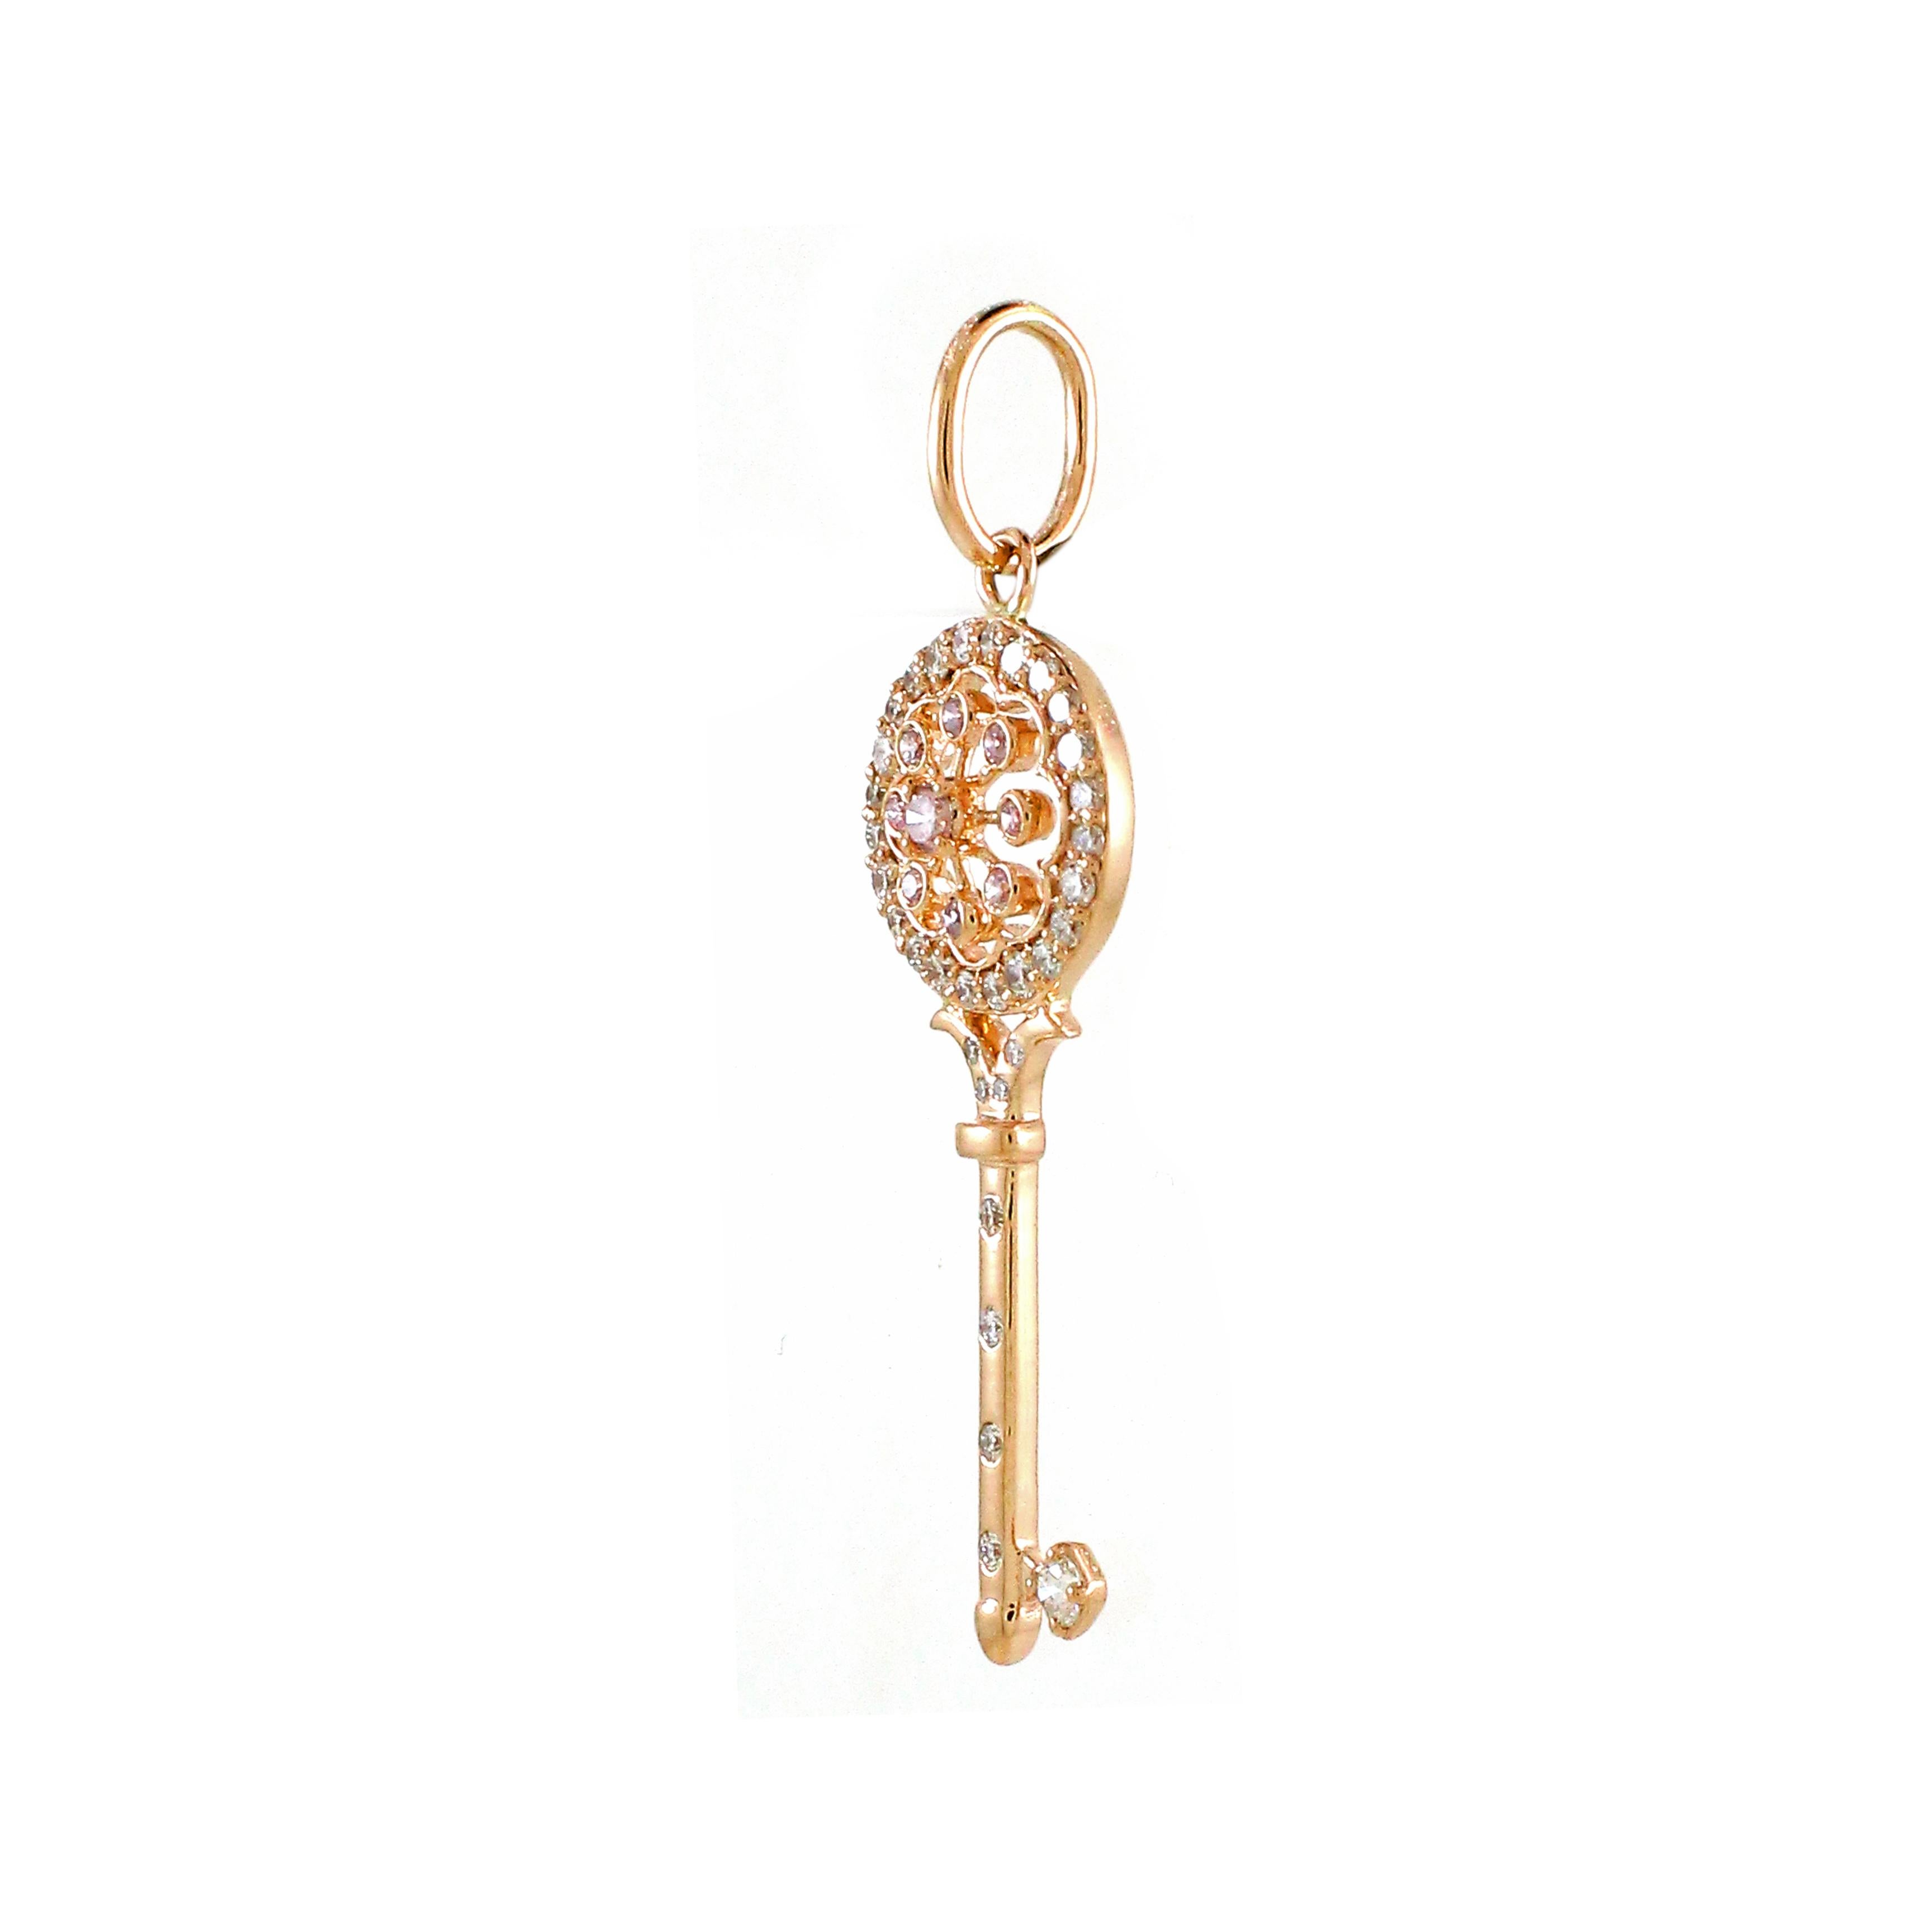 Experience the epitome of modern elegance with our exquisite key-inspired pendant, expertly crafted from 18k rose gold, weighing 1.97 grams in total. This chic and versatile piece exudes sophistication with its sleek design, making it suitable for